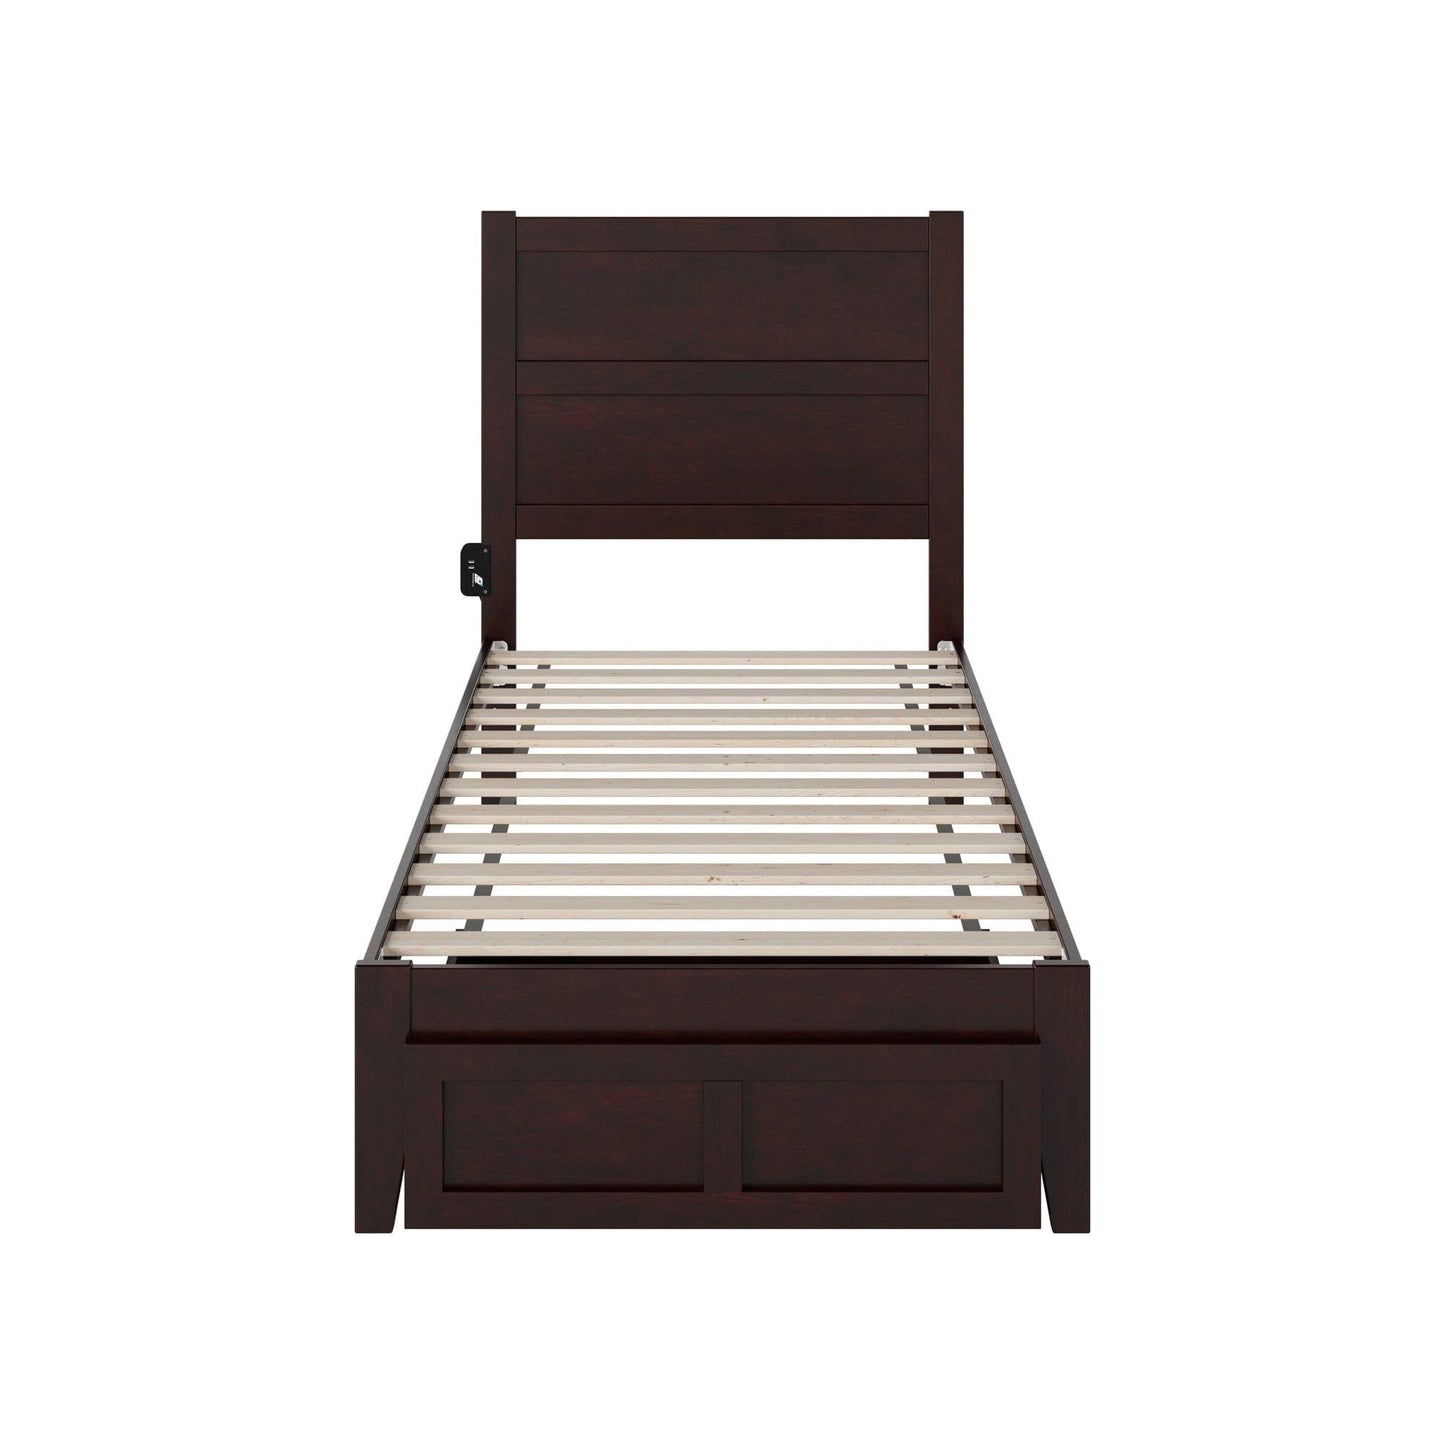 AFI Furnishings NoHo Twin Bed with Foot Drawer in Espresso AG9112221